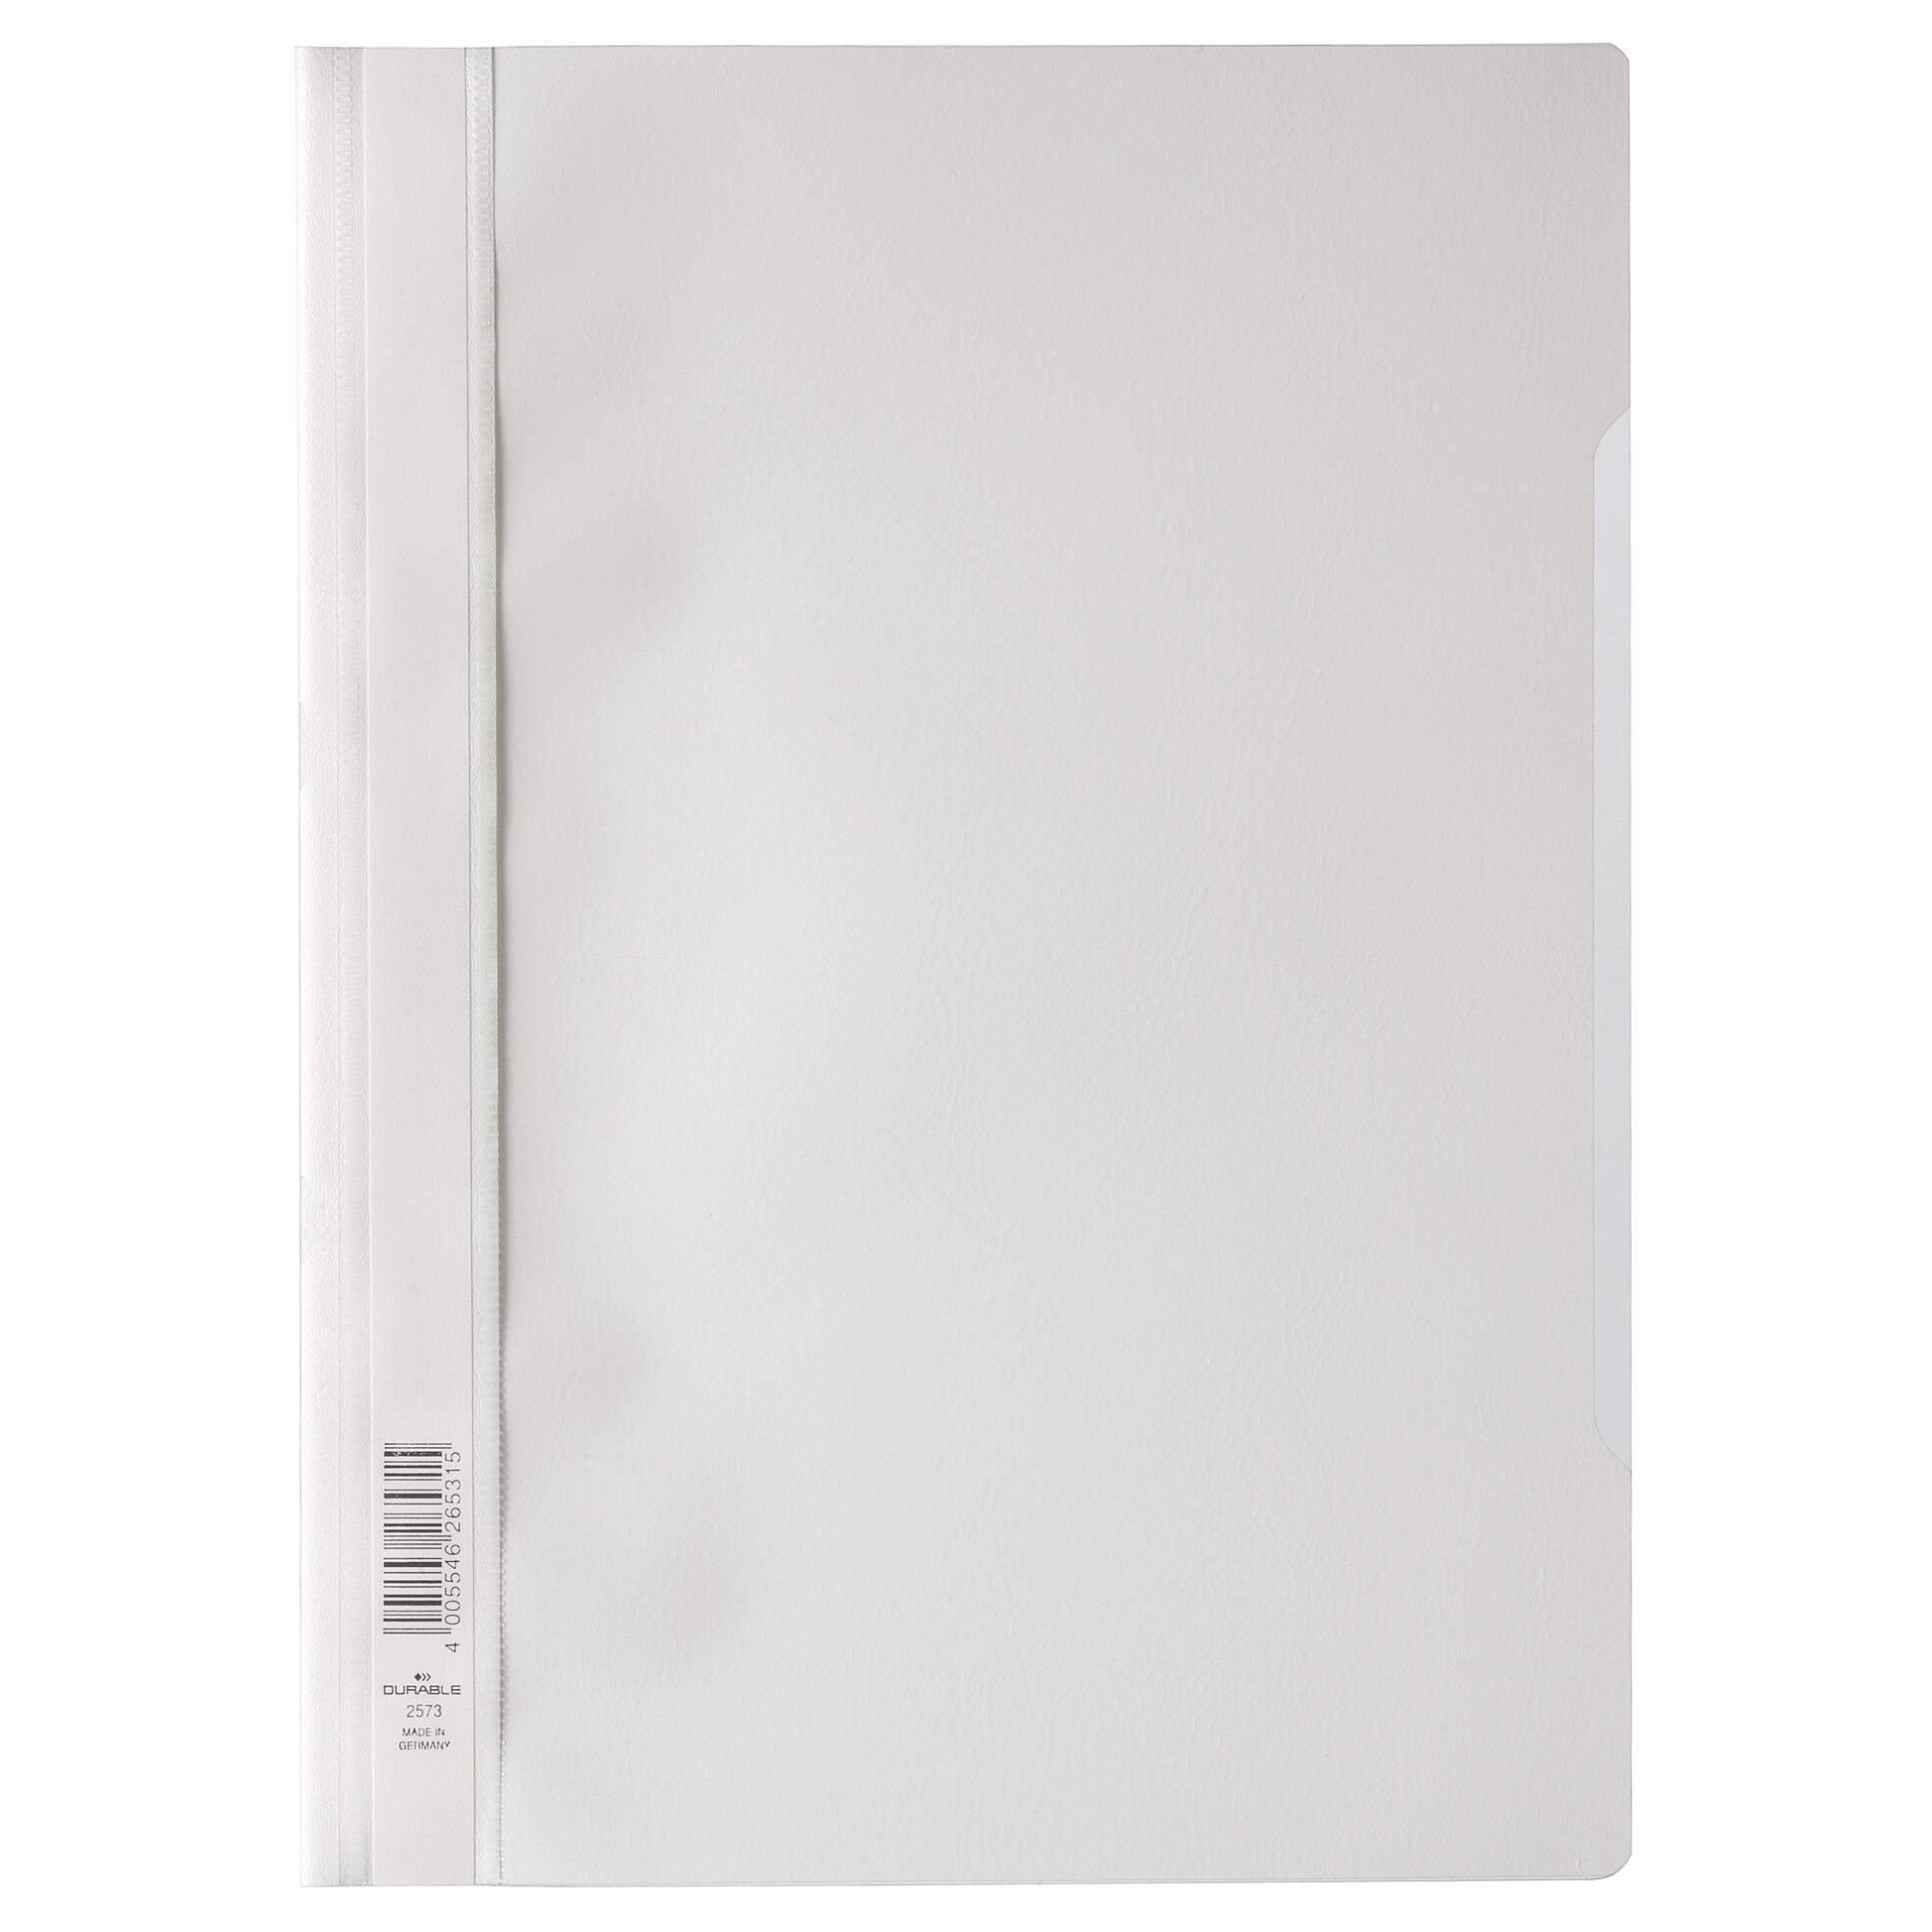 Clear View Project Folder Document Report File - 50 Pack - A4 White